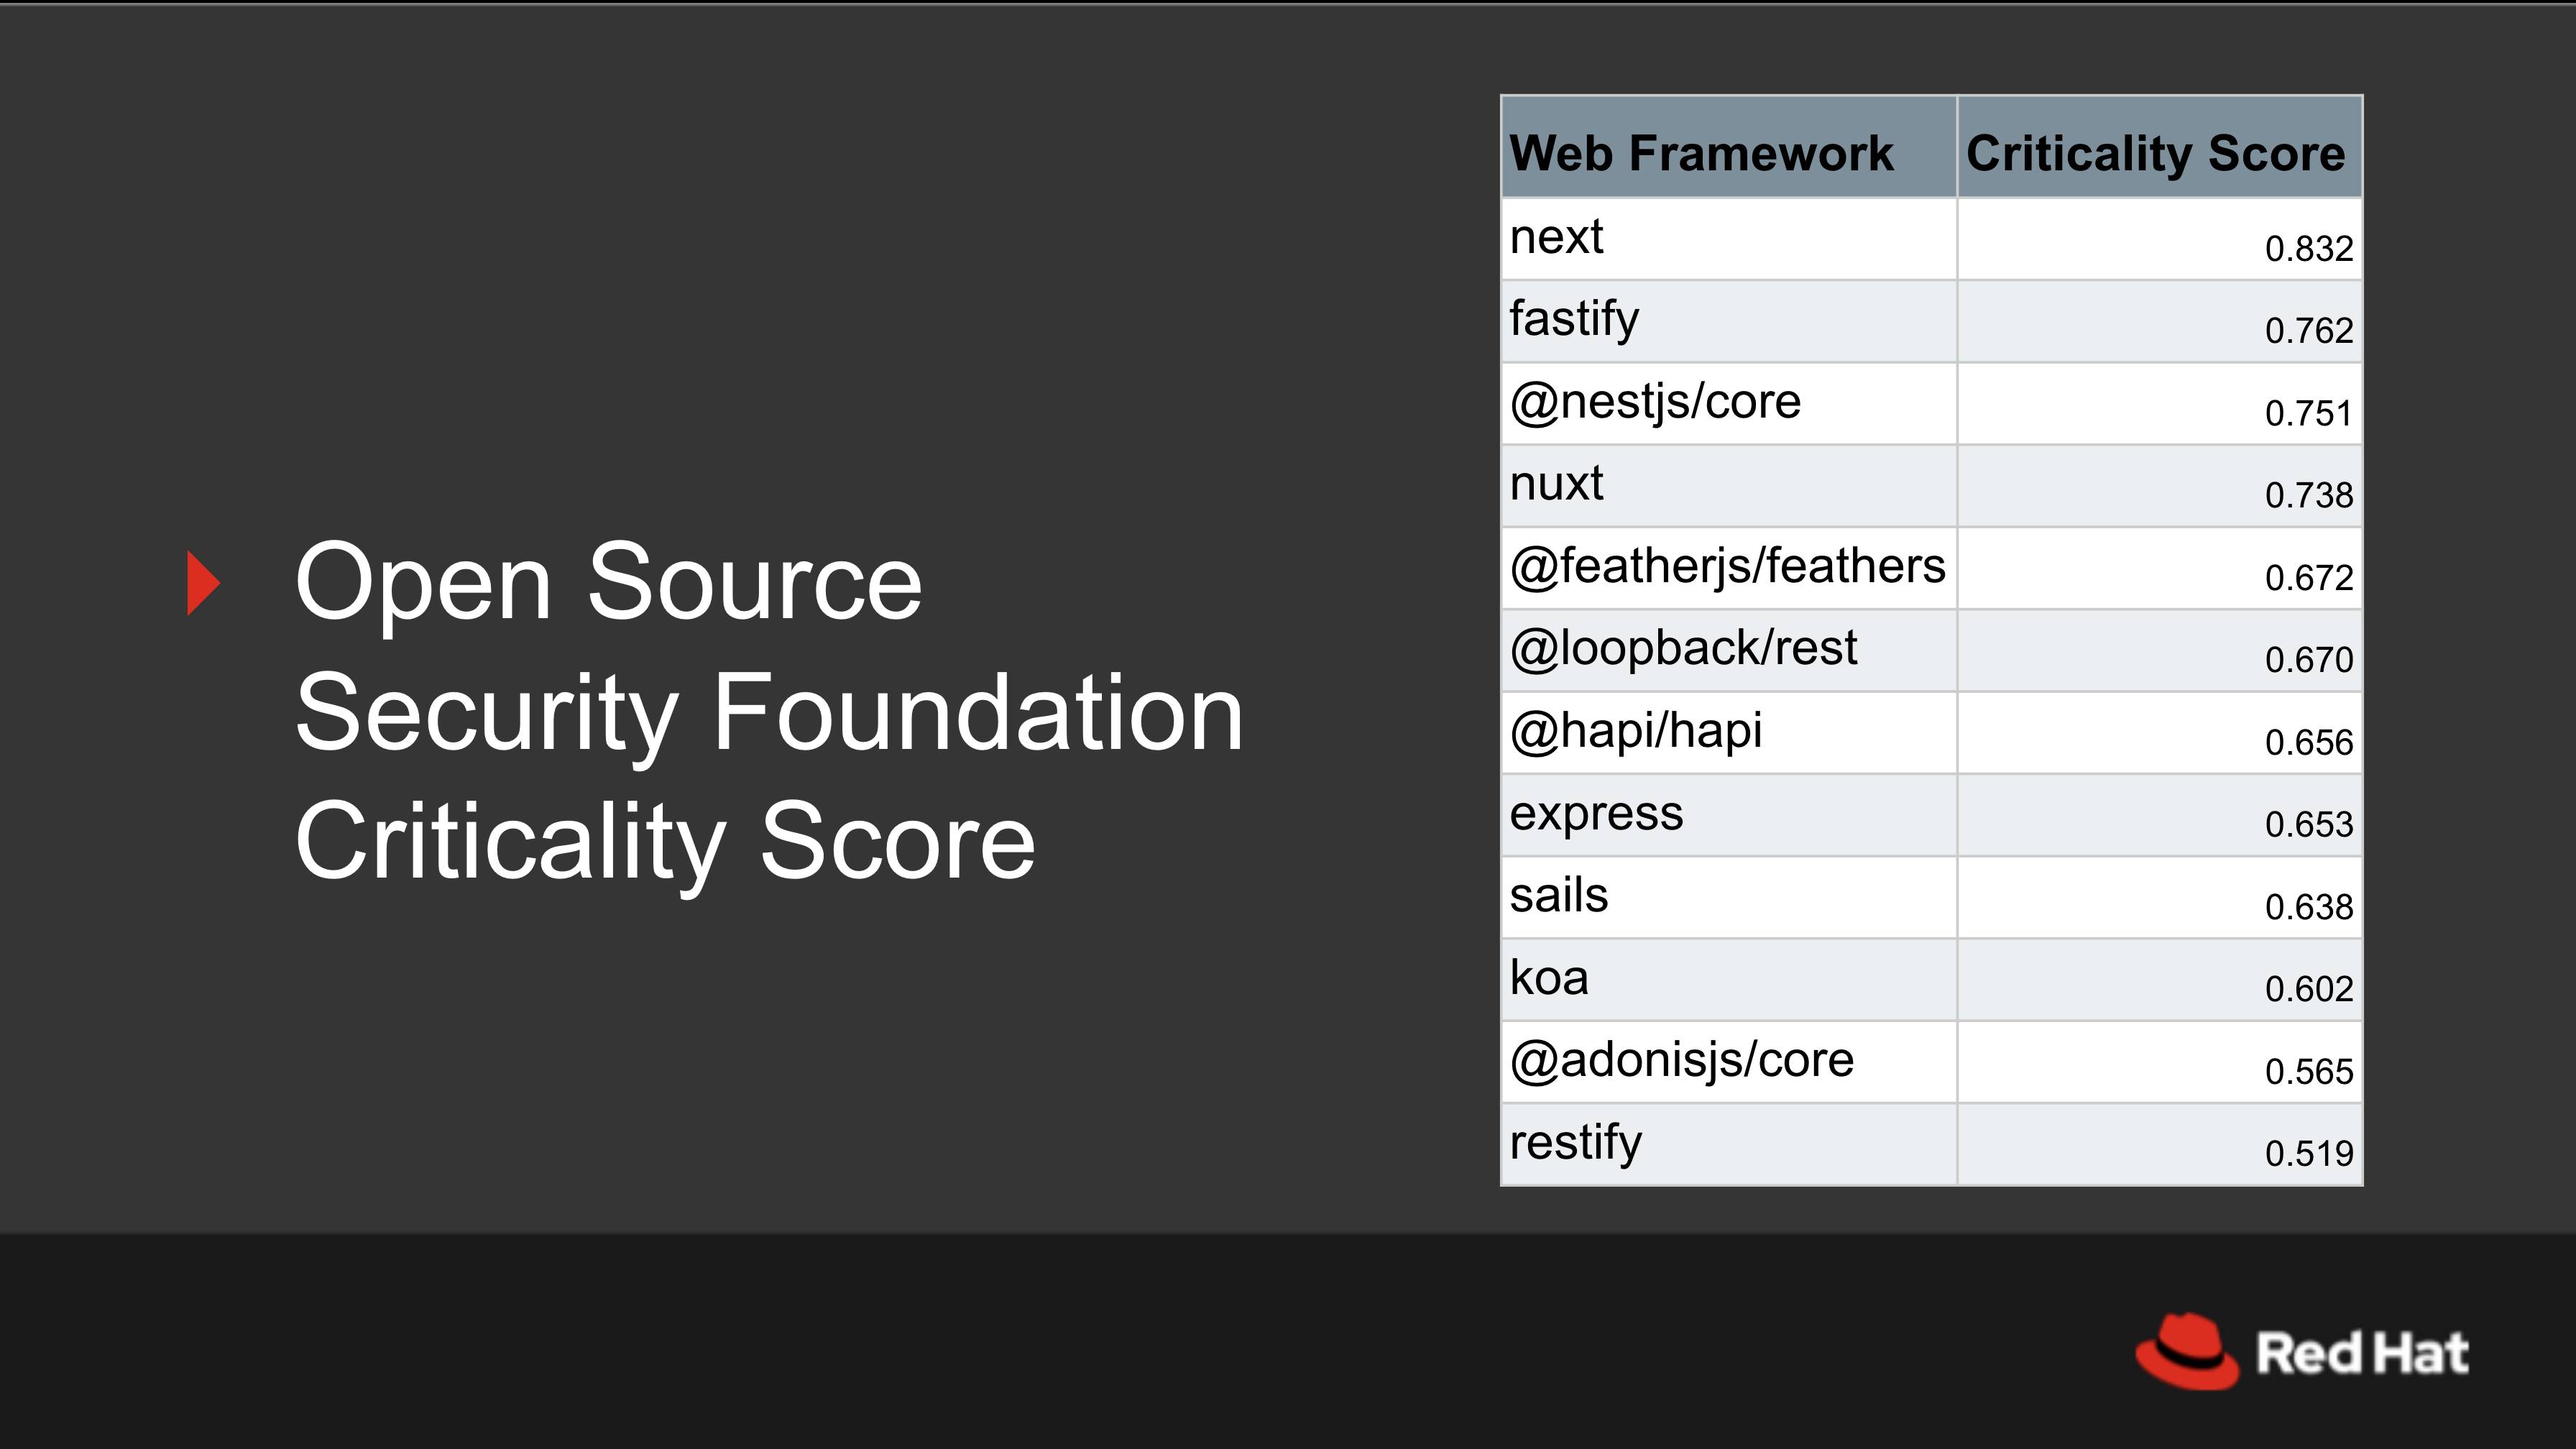 Open Source Security Foundation Criticality Scores